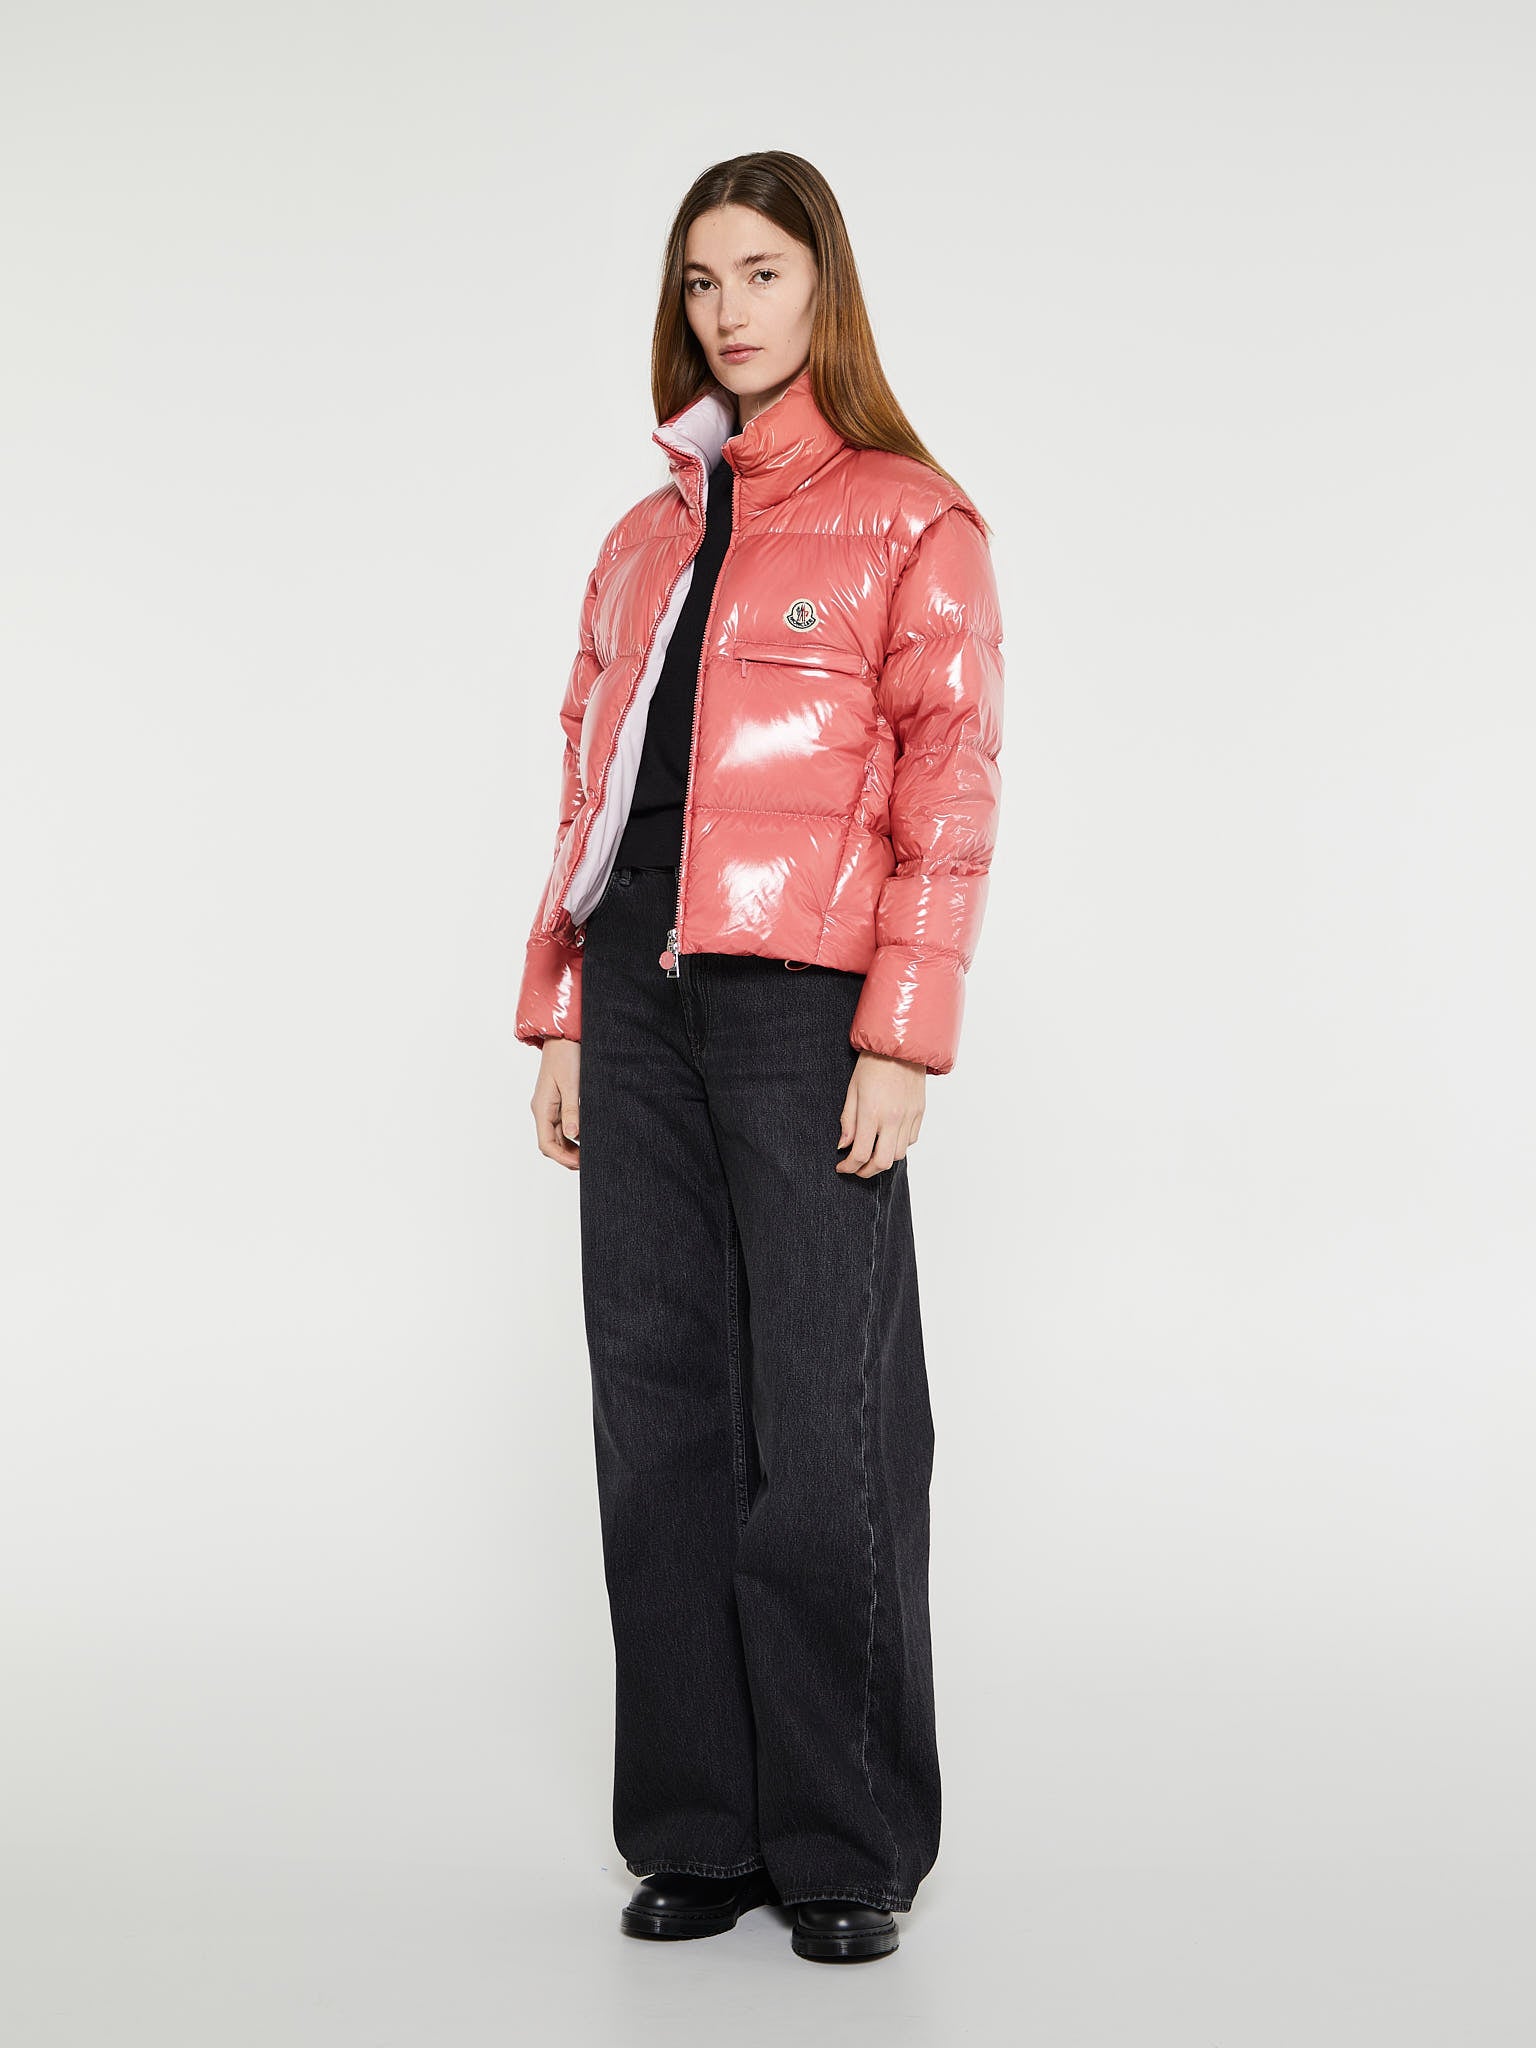 Almo Jacket in Rose